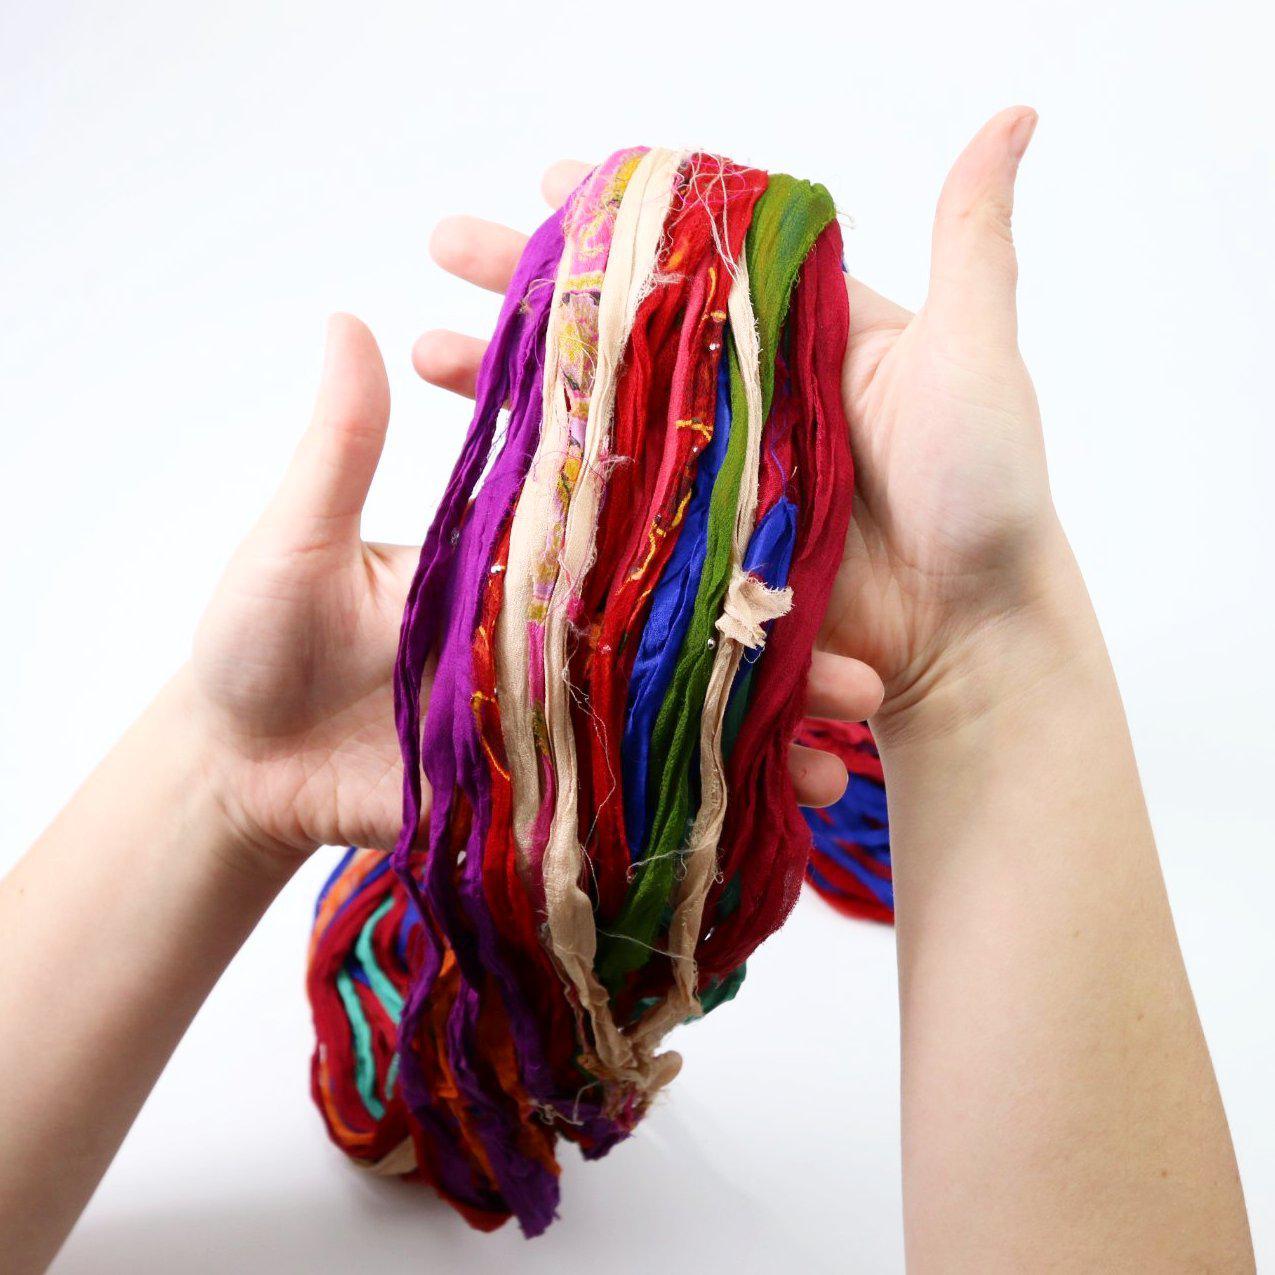 PLANT DYED SILK RIBBONS / COTTON RAG RECYCLED PAPER / LUXE